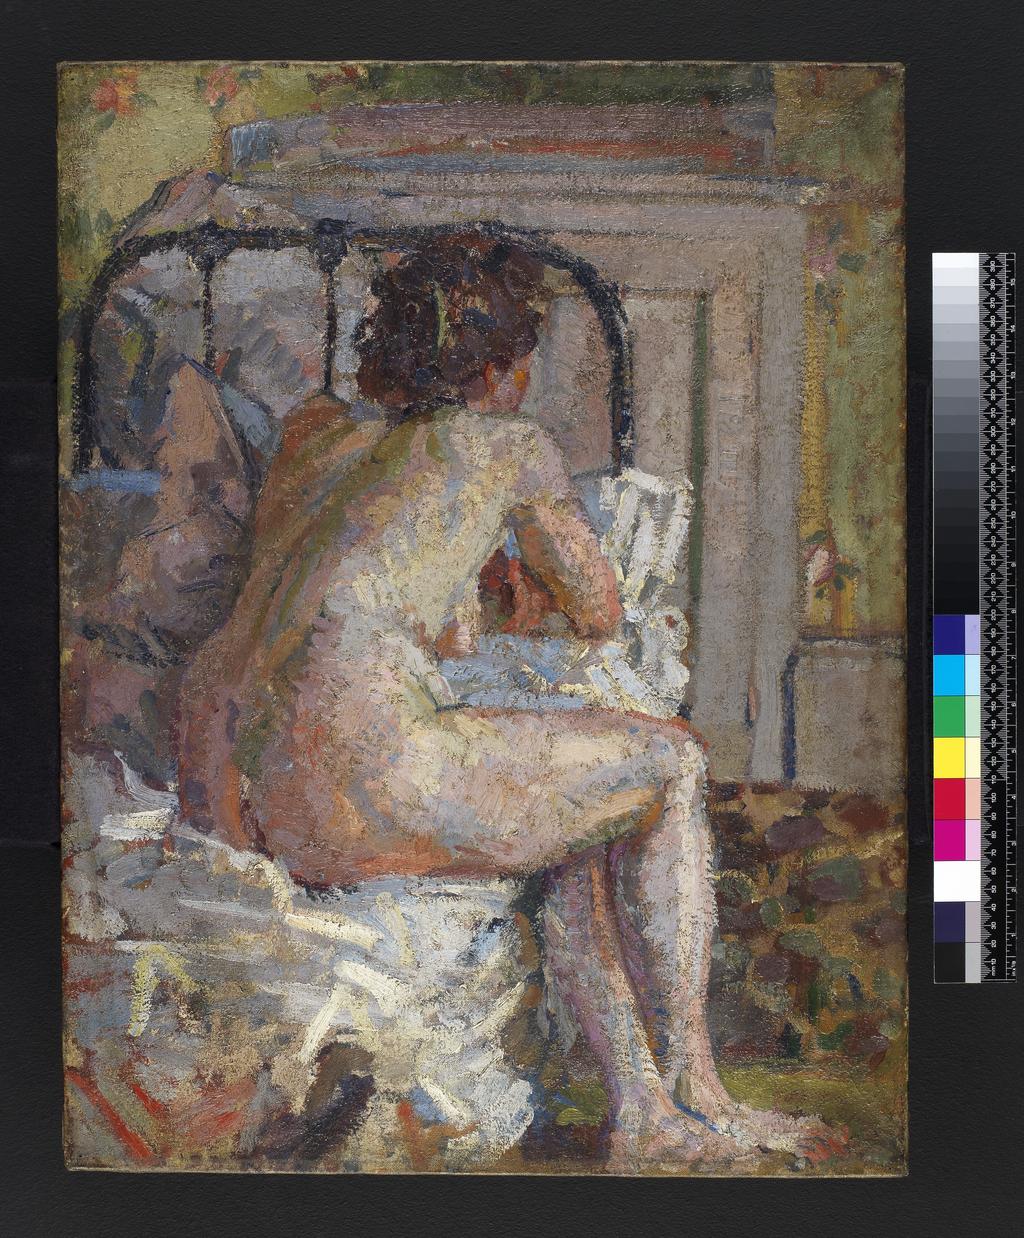 An image of Nude on a Bed. Gilman, Harold (British, 1876-1919). Oil on canvas, height 61.4 cm, width 46.7 cm, circa 1914.